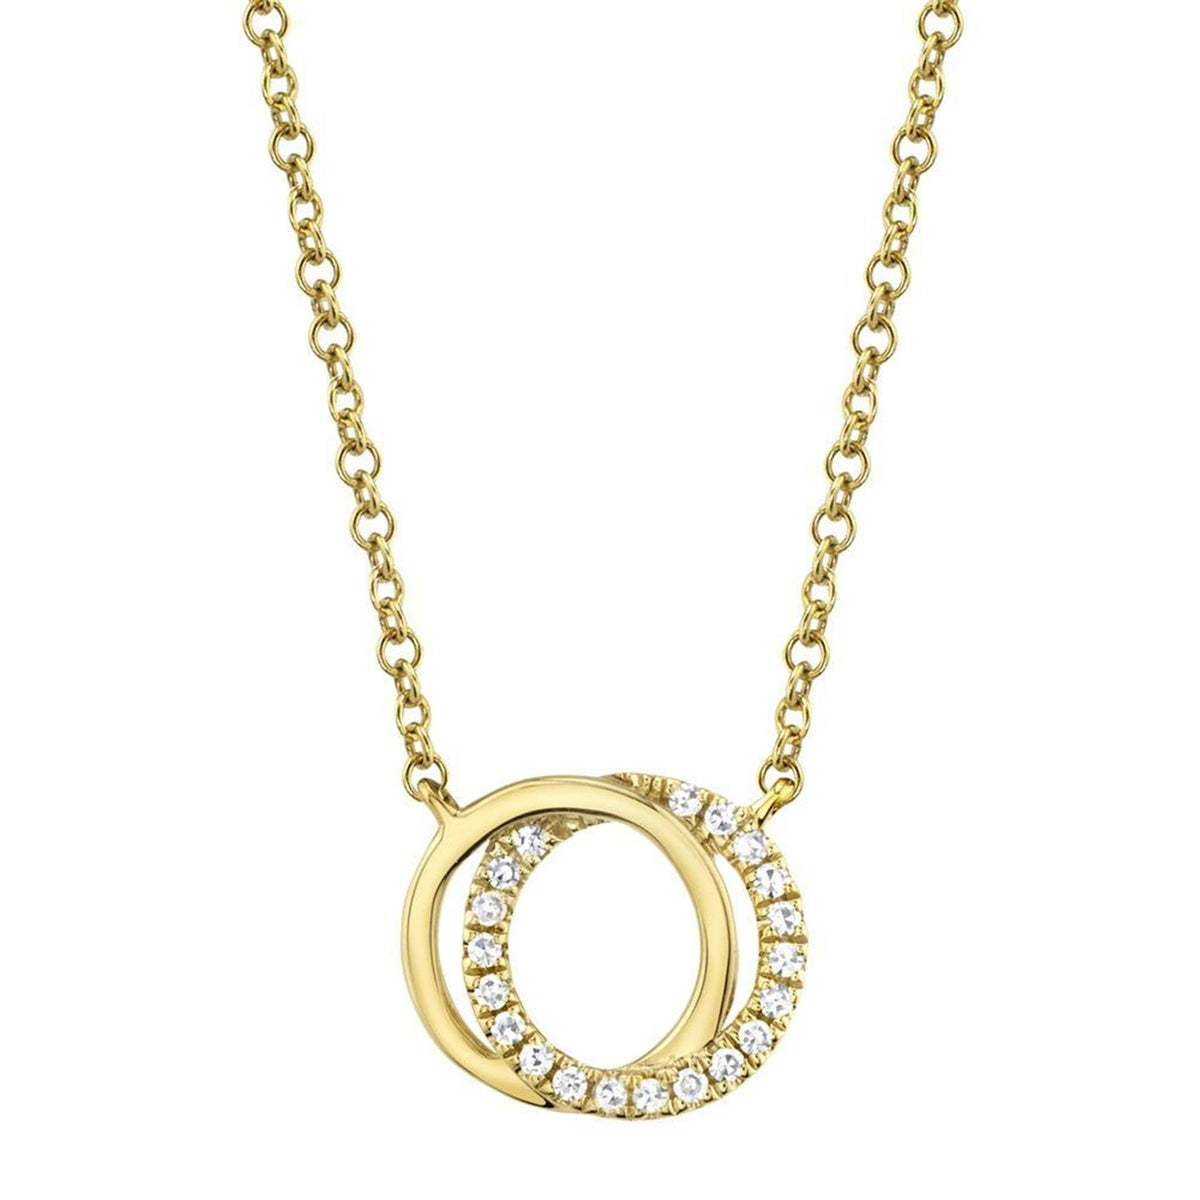 Shy Creation 14Kt Yellow Gold 'You & Me' Intersecting Circle Diamond Necklace